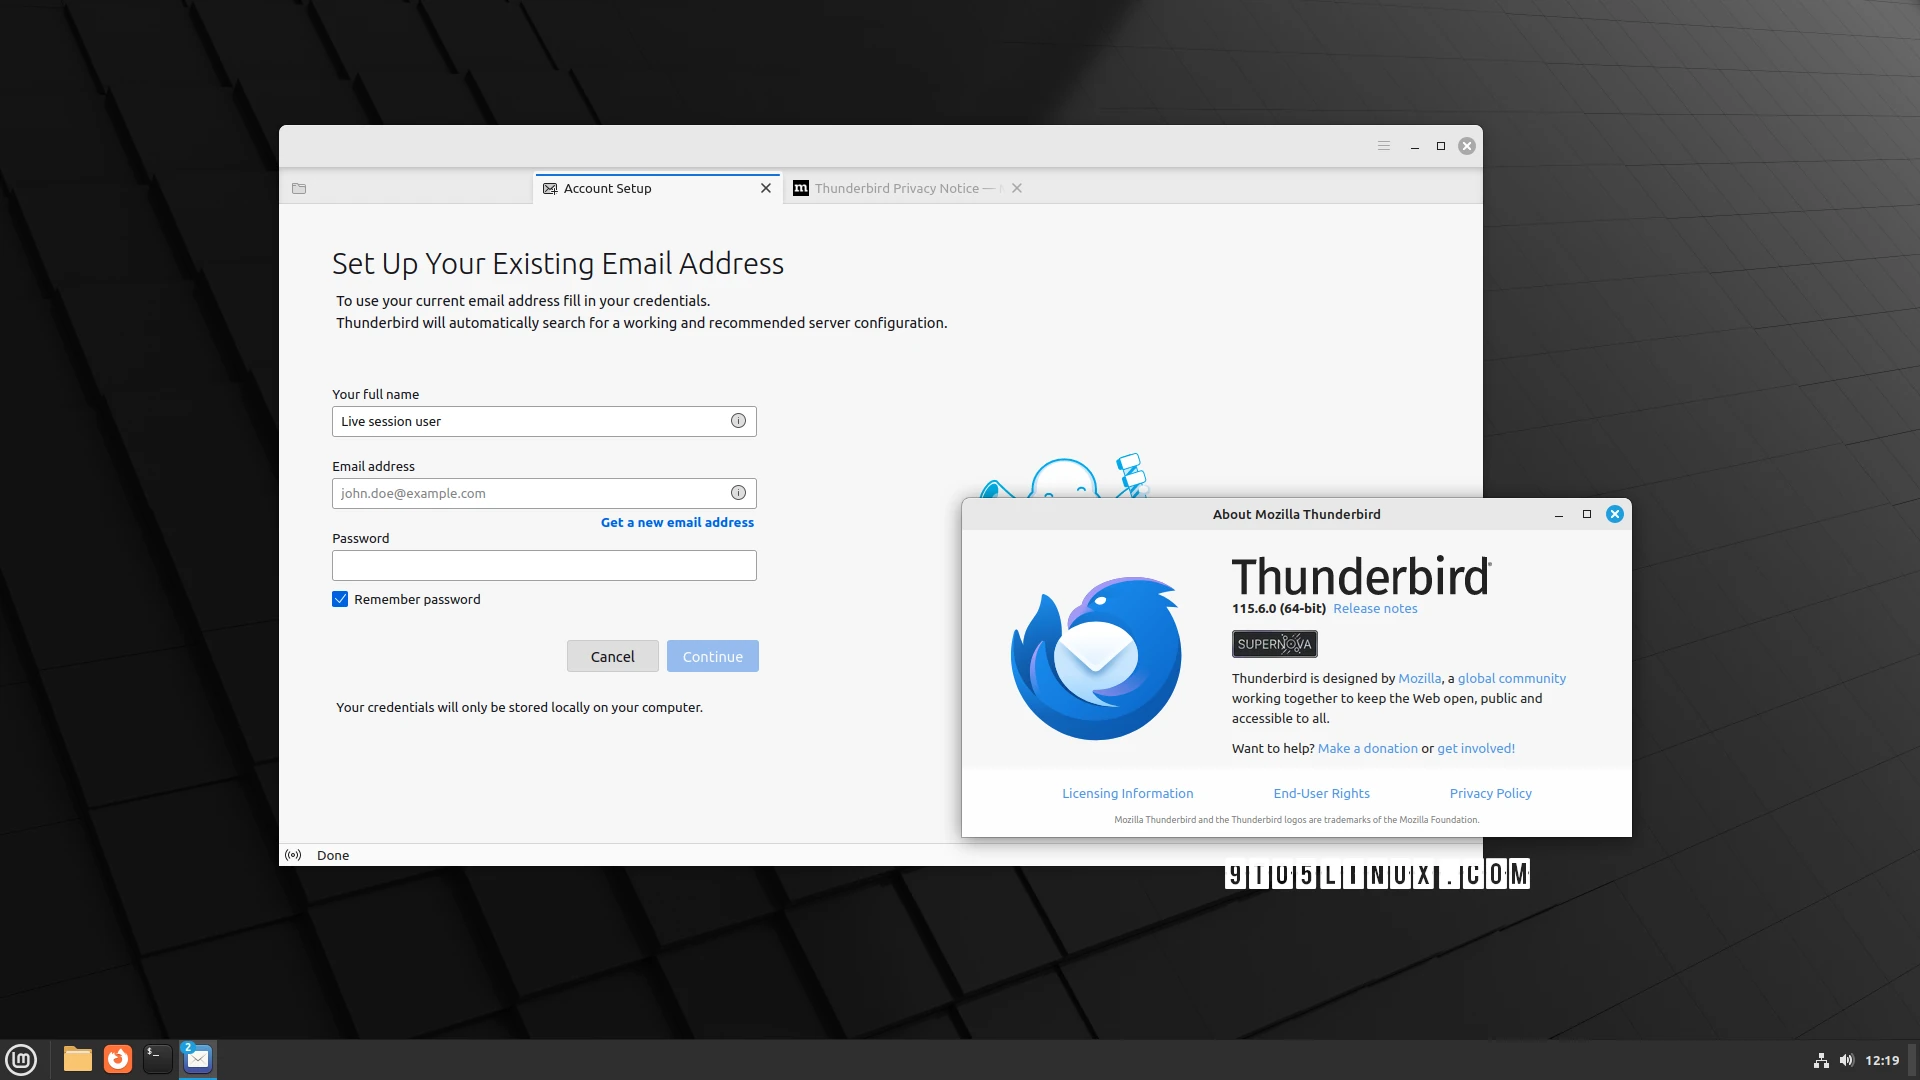 Linux Mint Devs to Ship Thunderbird as a Native DEB Package in Linux Mint 22